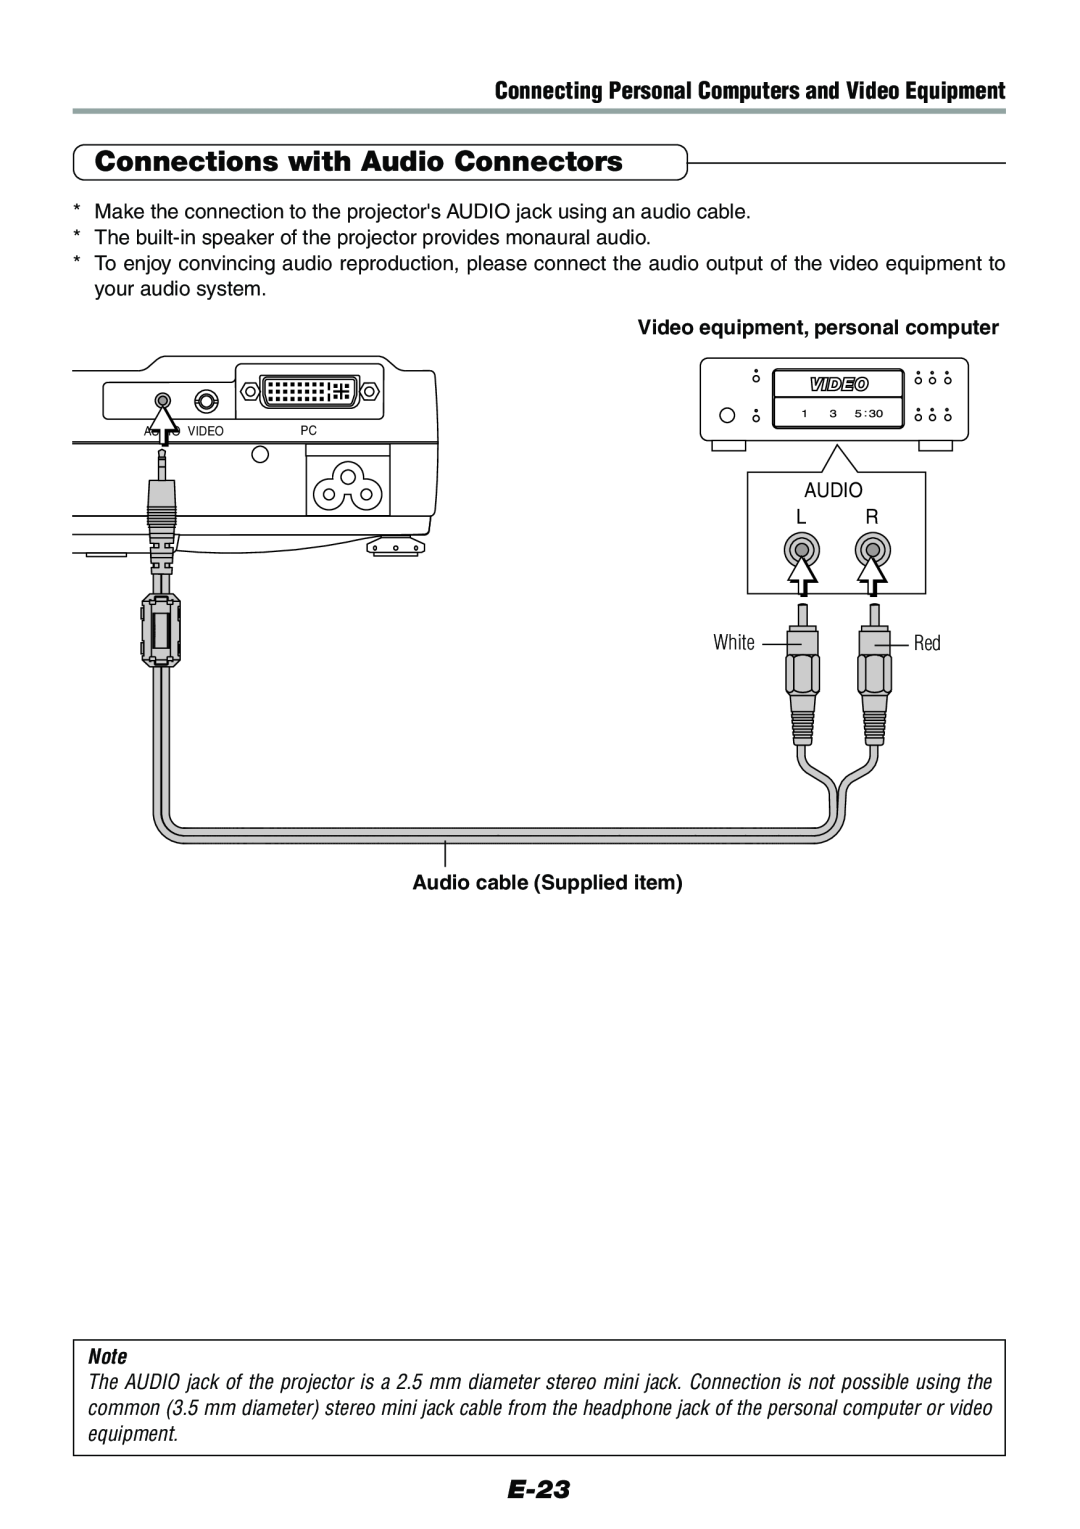 Epson V-1100 user manual Connections with Audio Connectors, E-23, Connecting Personal Computers and Video Equipment 